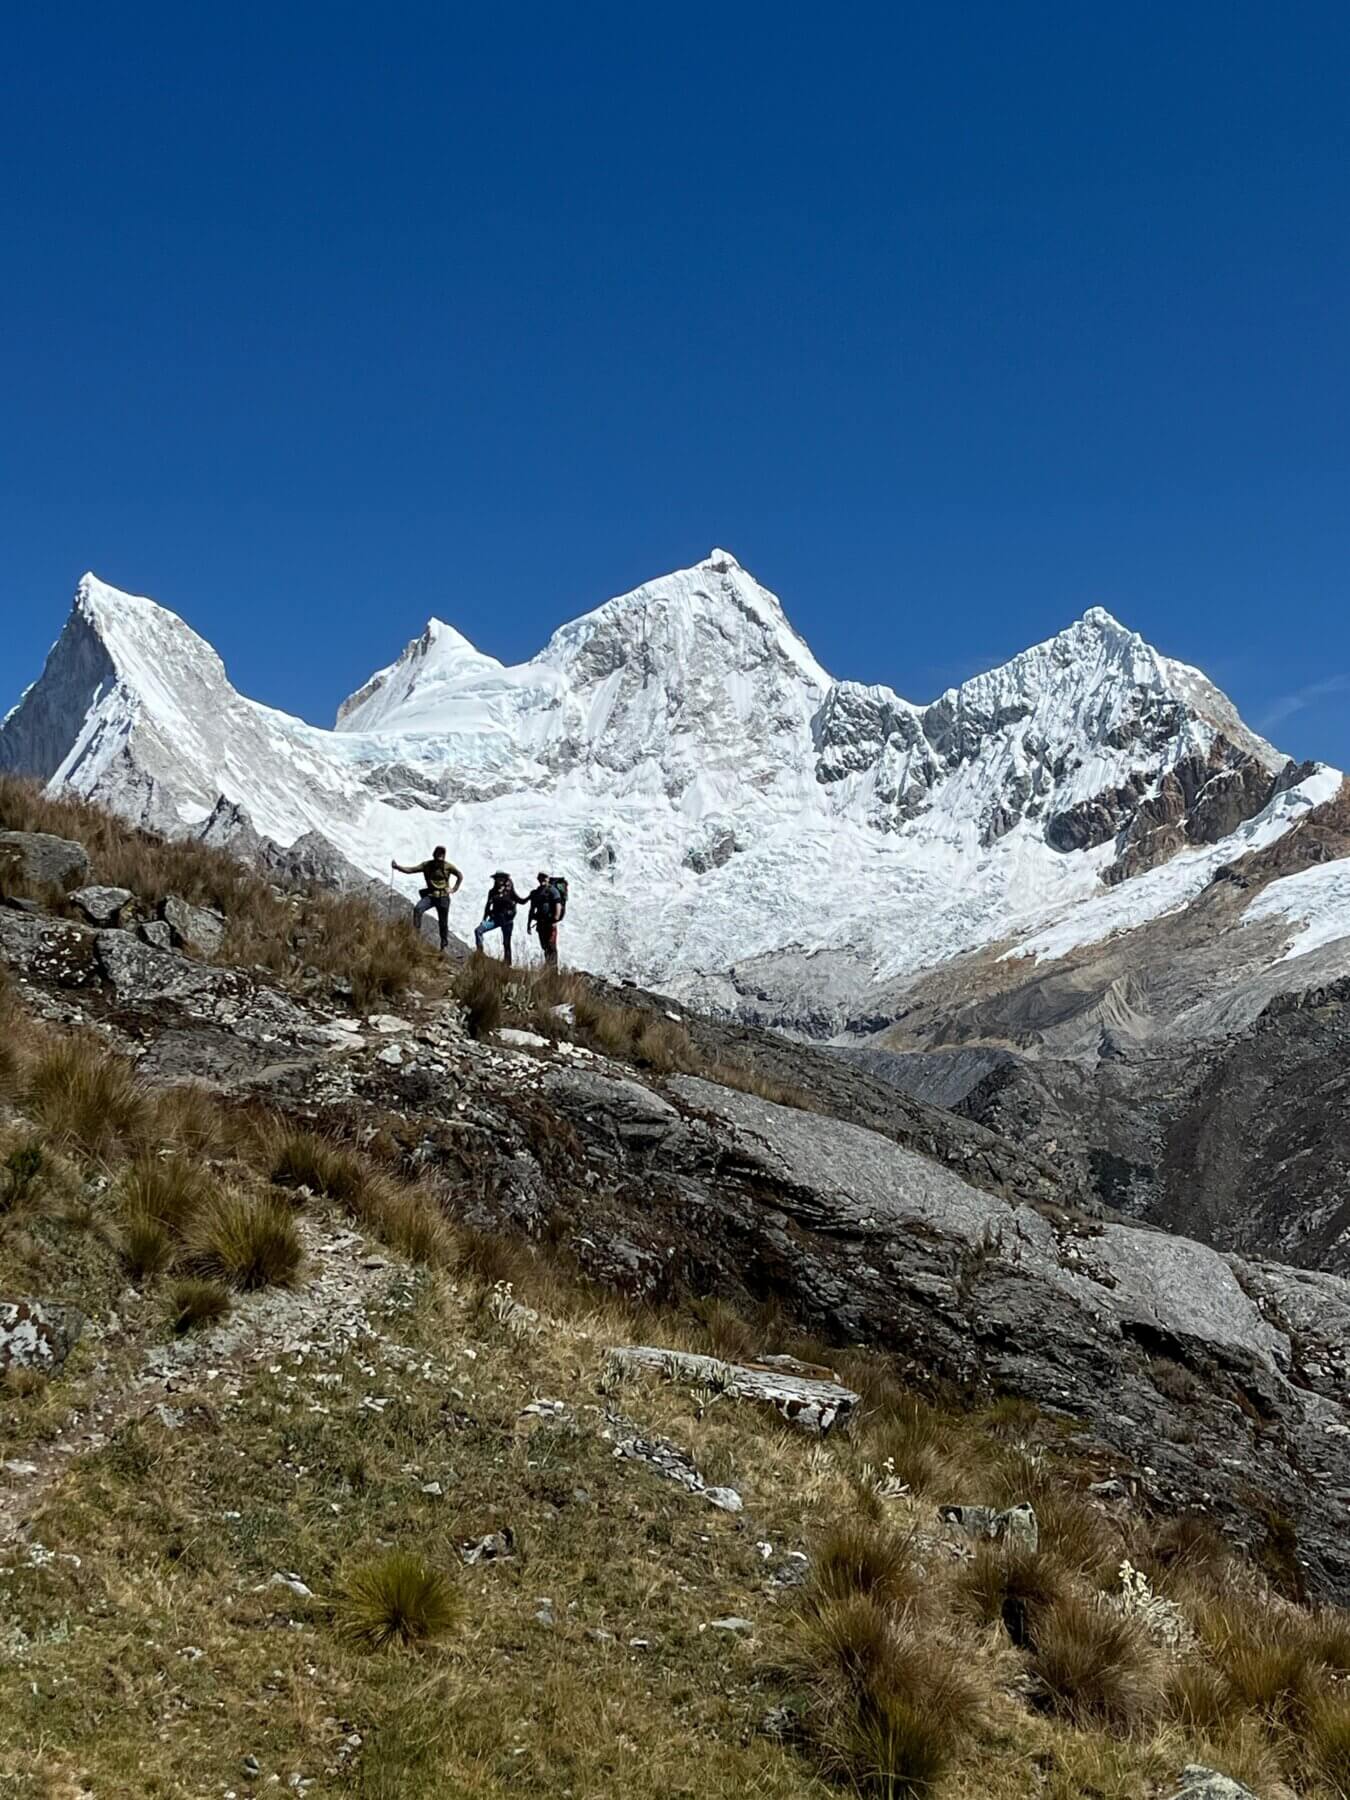 A group of climbers stands in front of 3 snowy peaks in Peru.